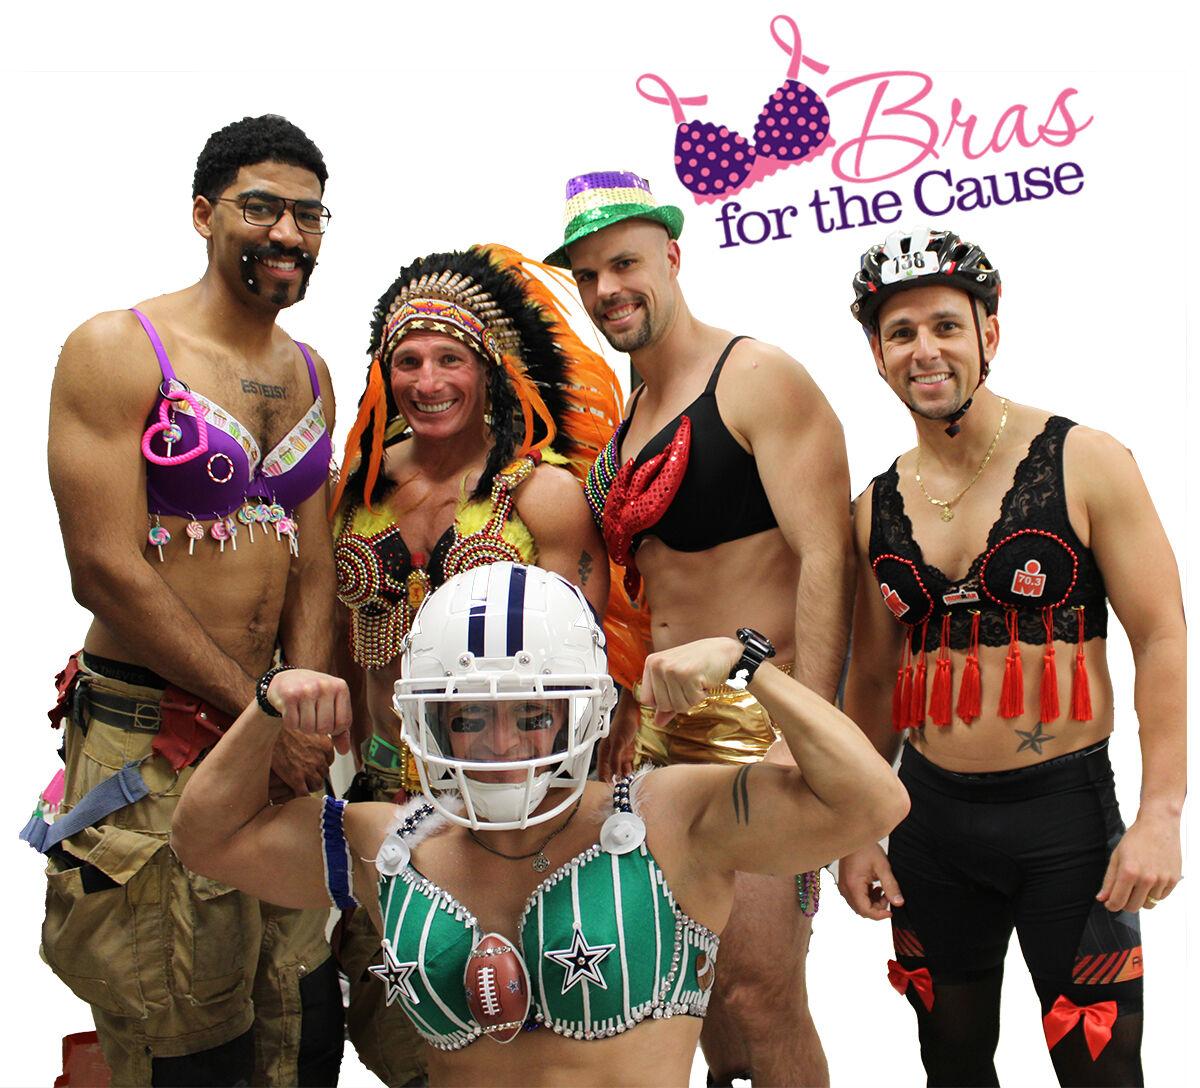 Bras for the Cause raised over $150,000 to fight cancer, Local